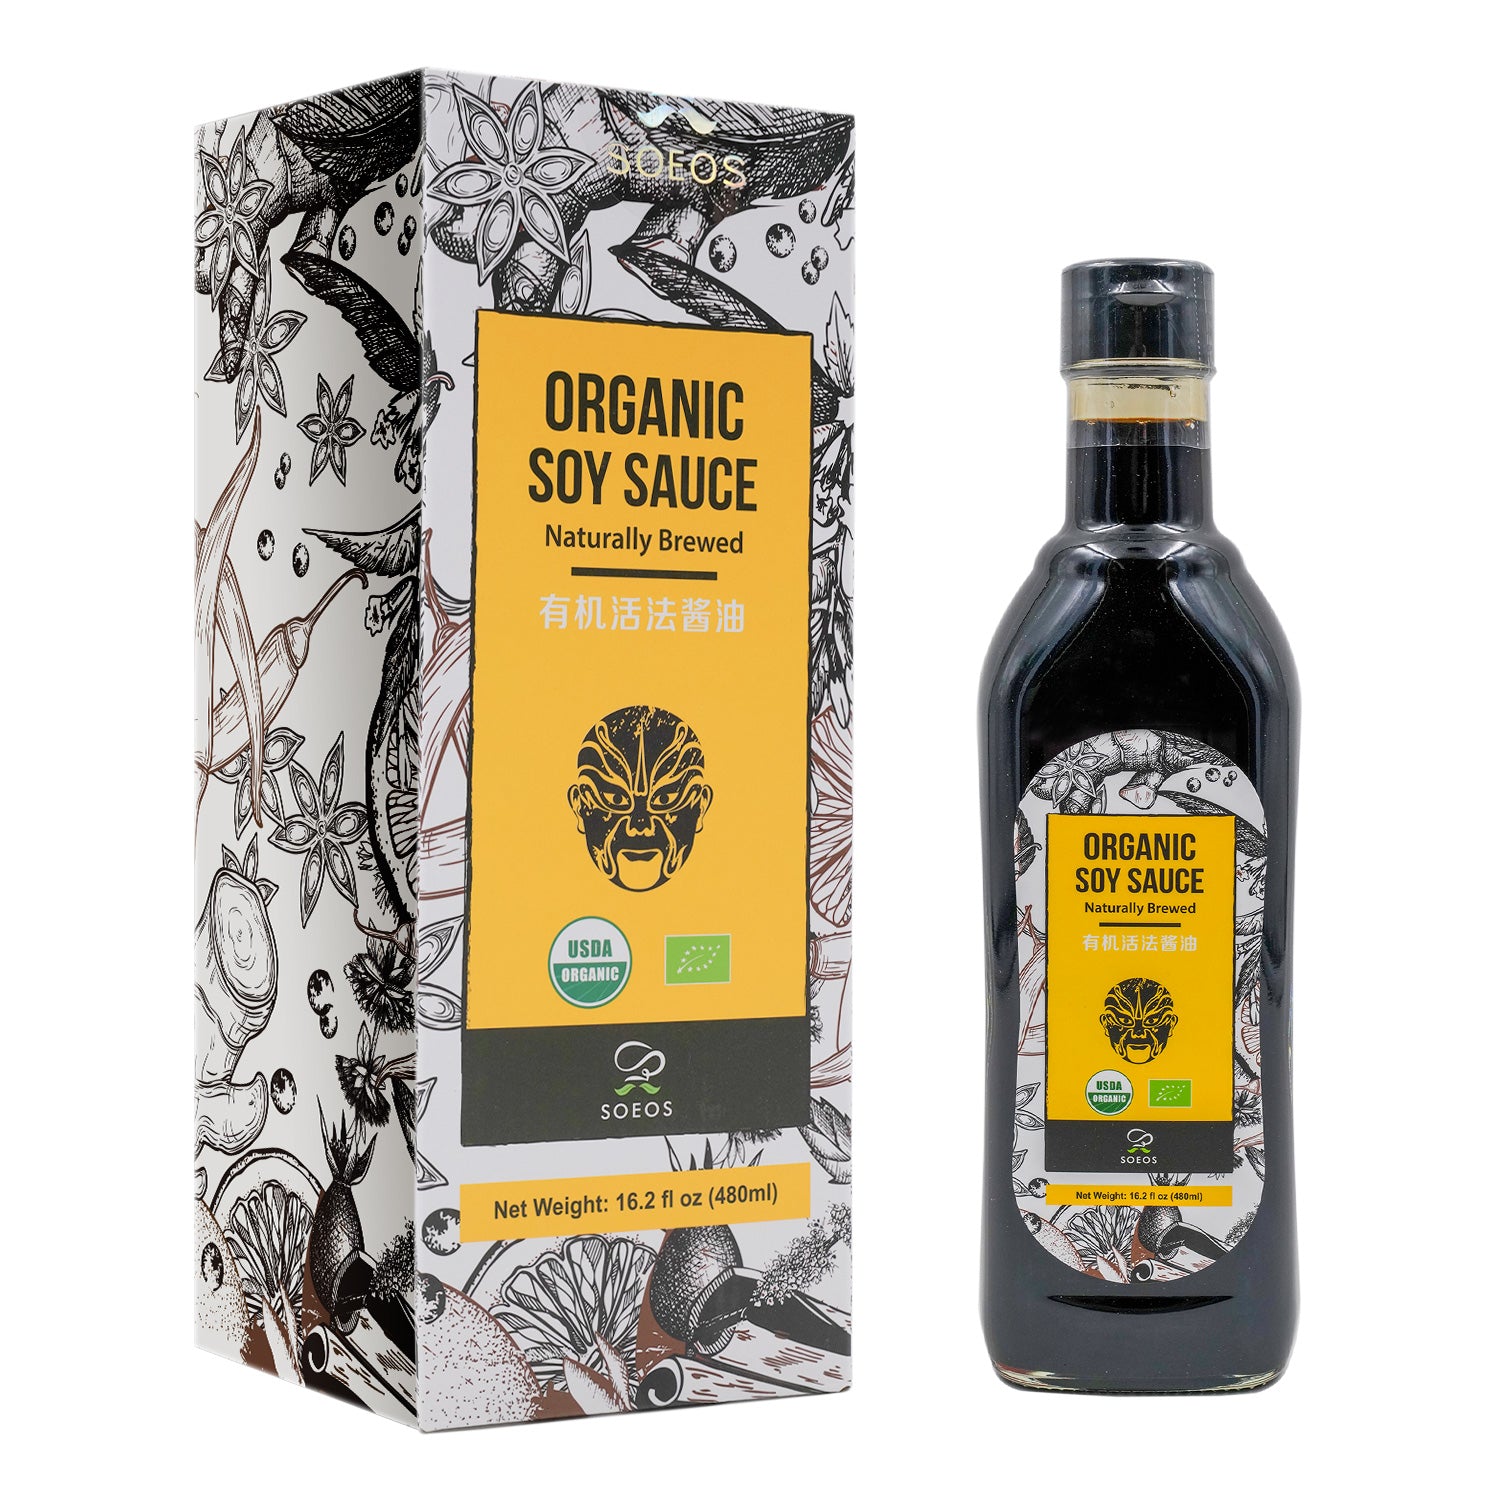 Soeos organic naturally brewed soy sauce and its box case.